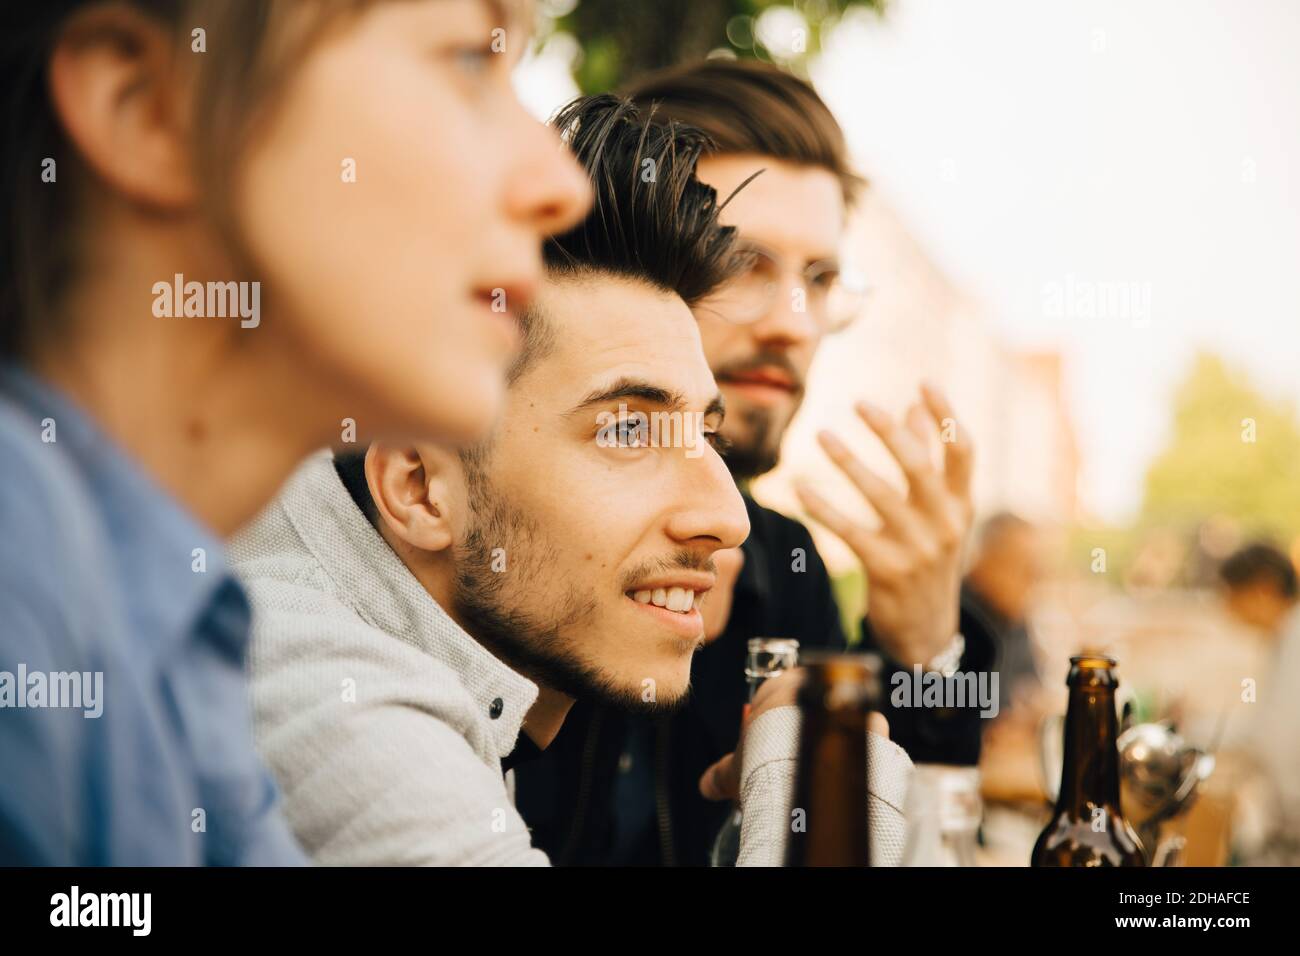 Smiling man sitting by male and female friend at social gathering Stock Photo